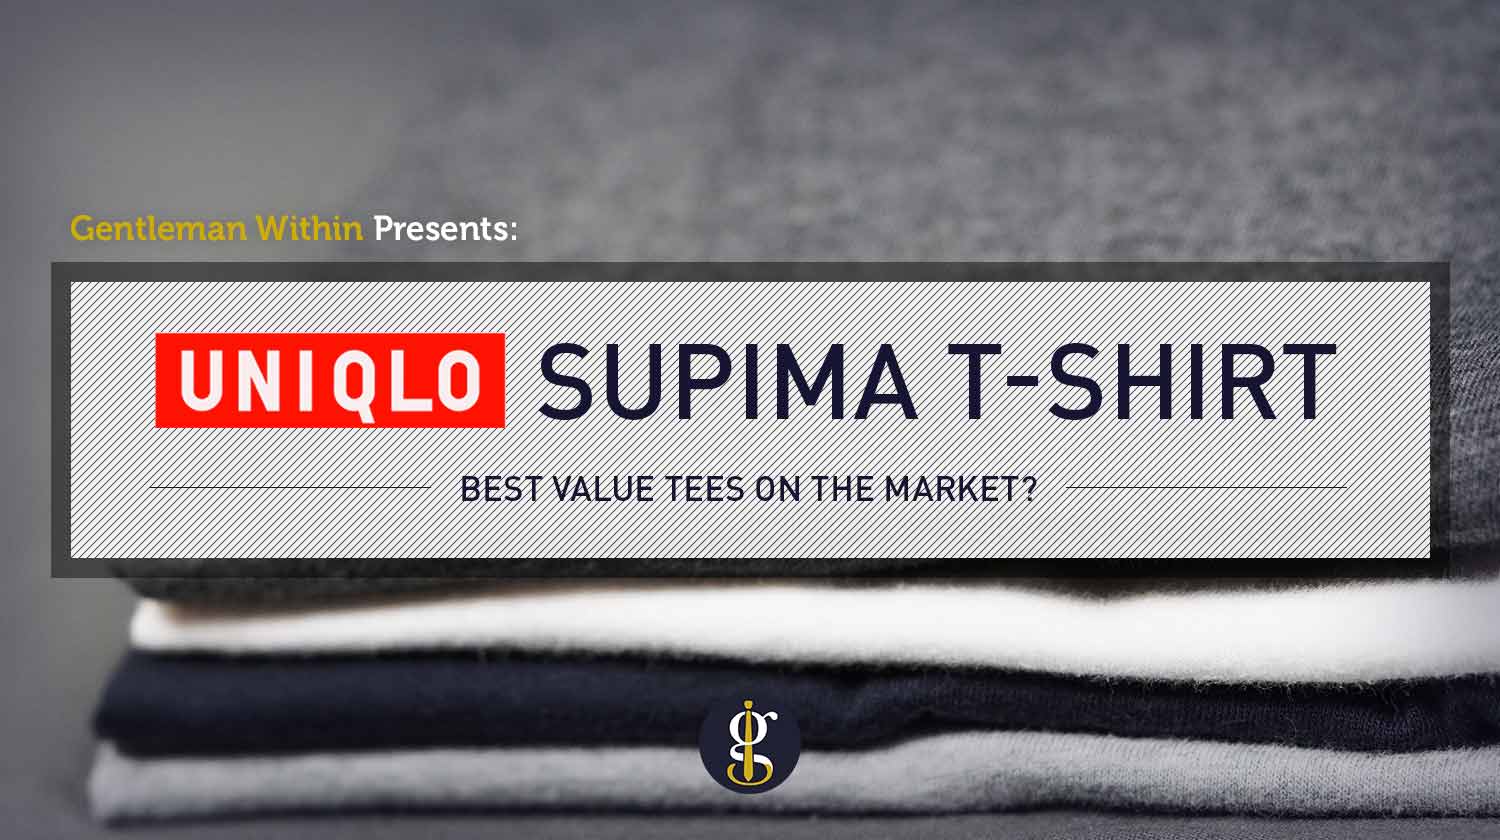 Uniqlo Supima Cotton T-Shirt Review (Best Value Tees?) | GENTLEMAN WITHIN